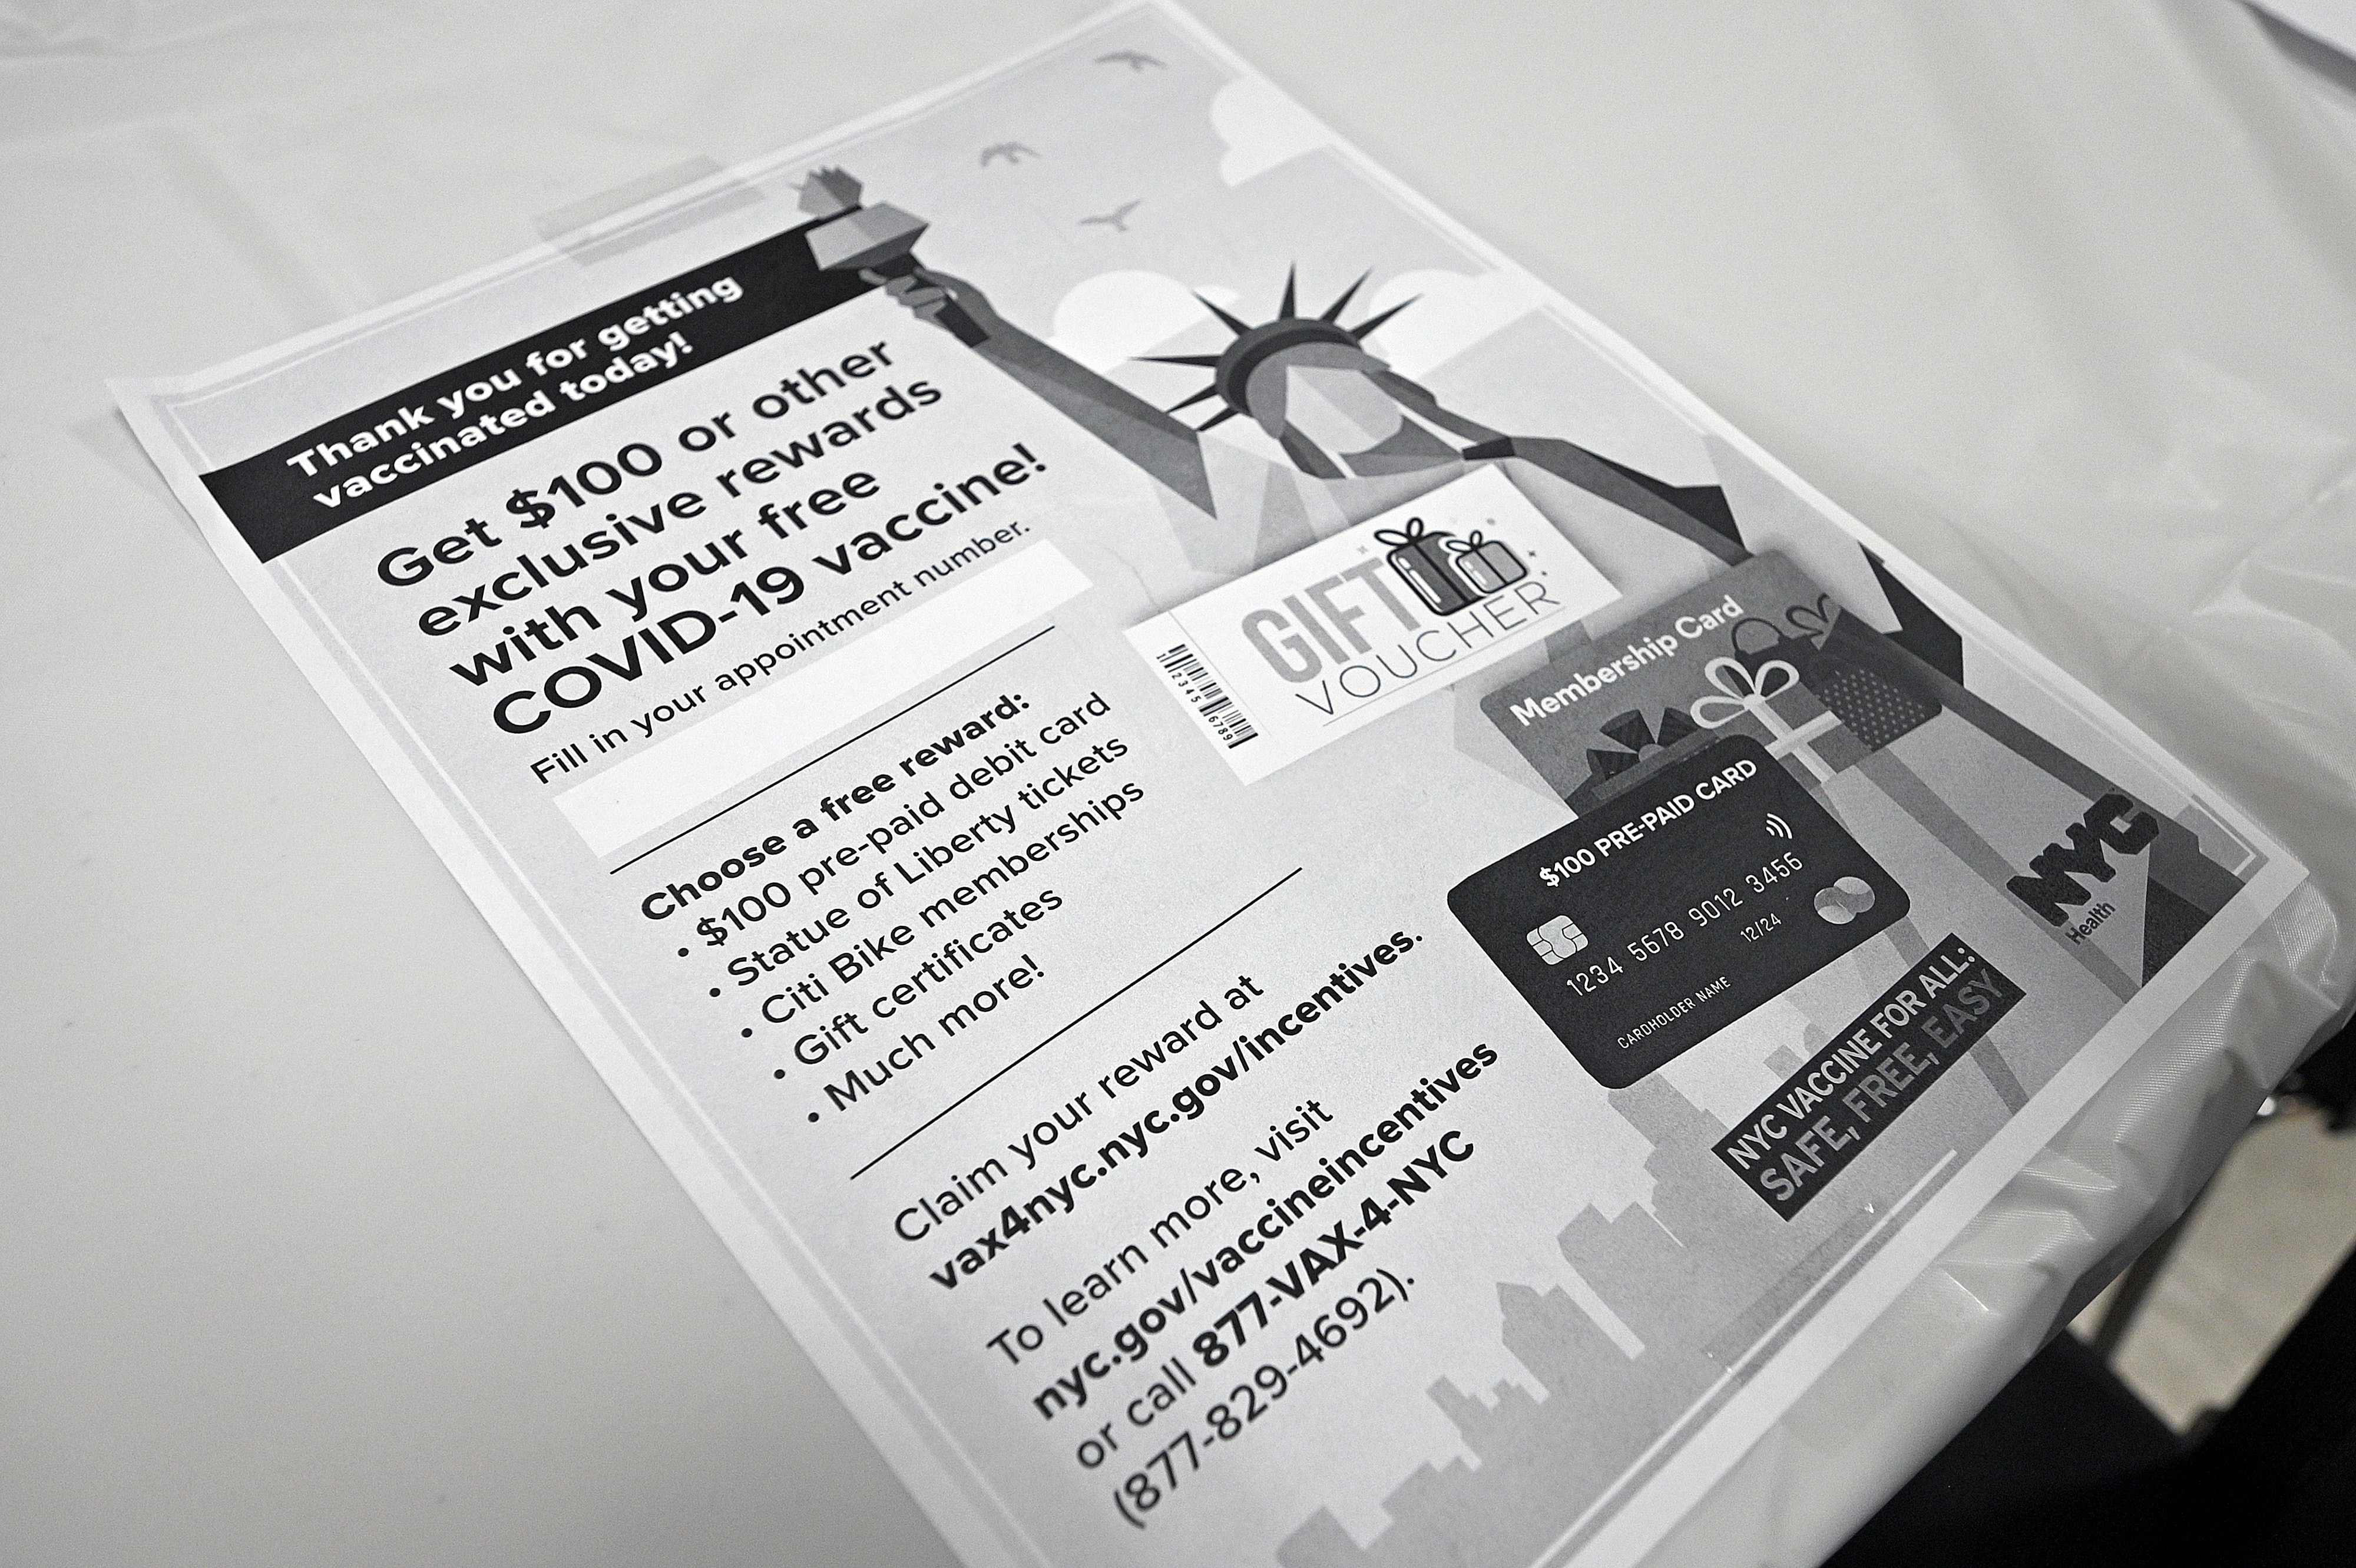 A flyer announcing New York City's $100 gift voucher for any resident getting a COVID-19 vaccine.